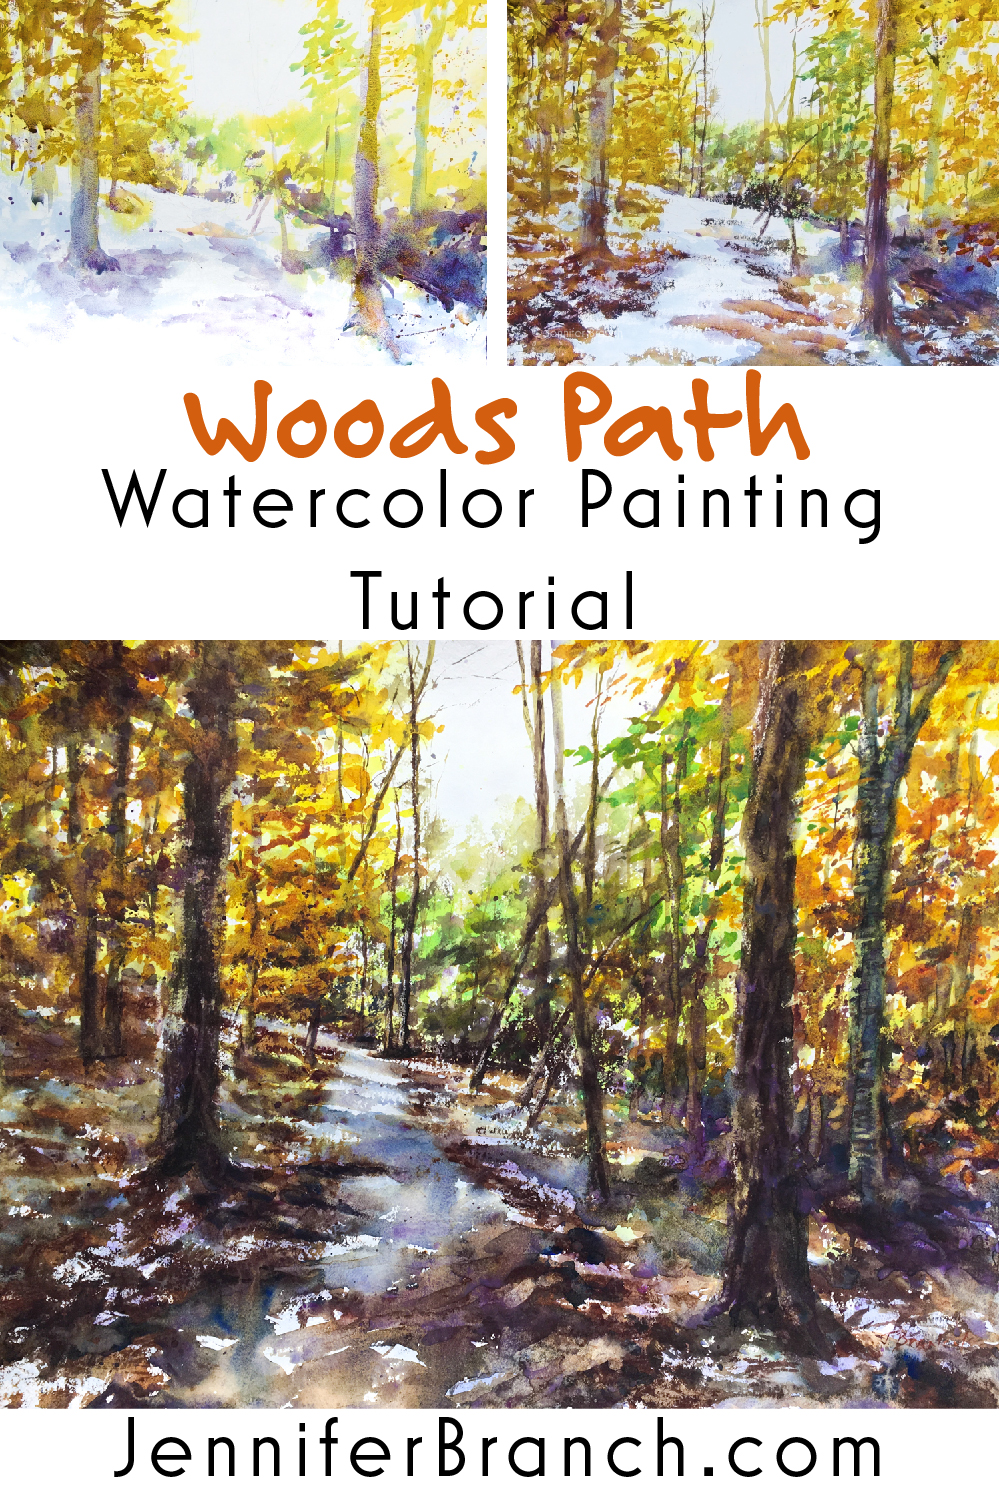 Woods Path Painting Tutorial watercolor painting tutorial by Jennifer Branch